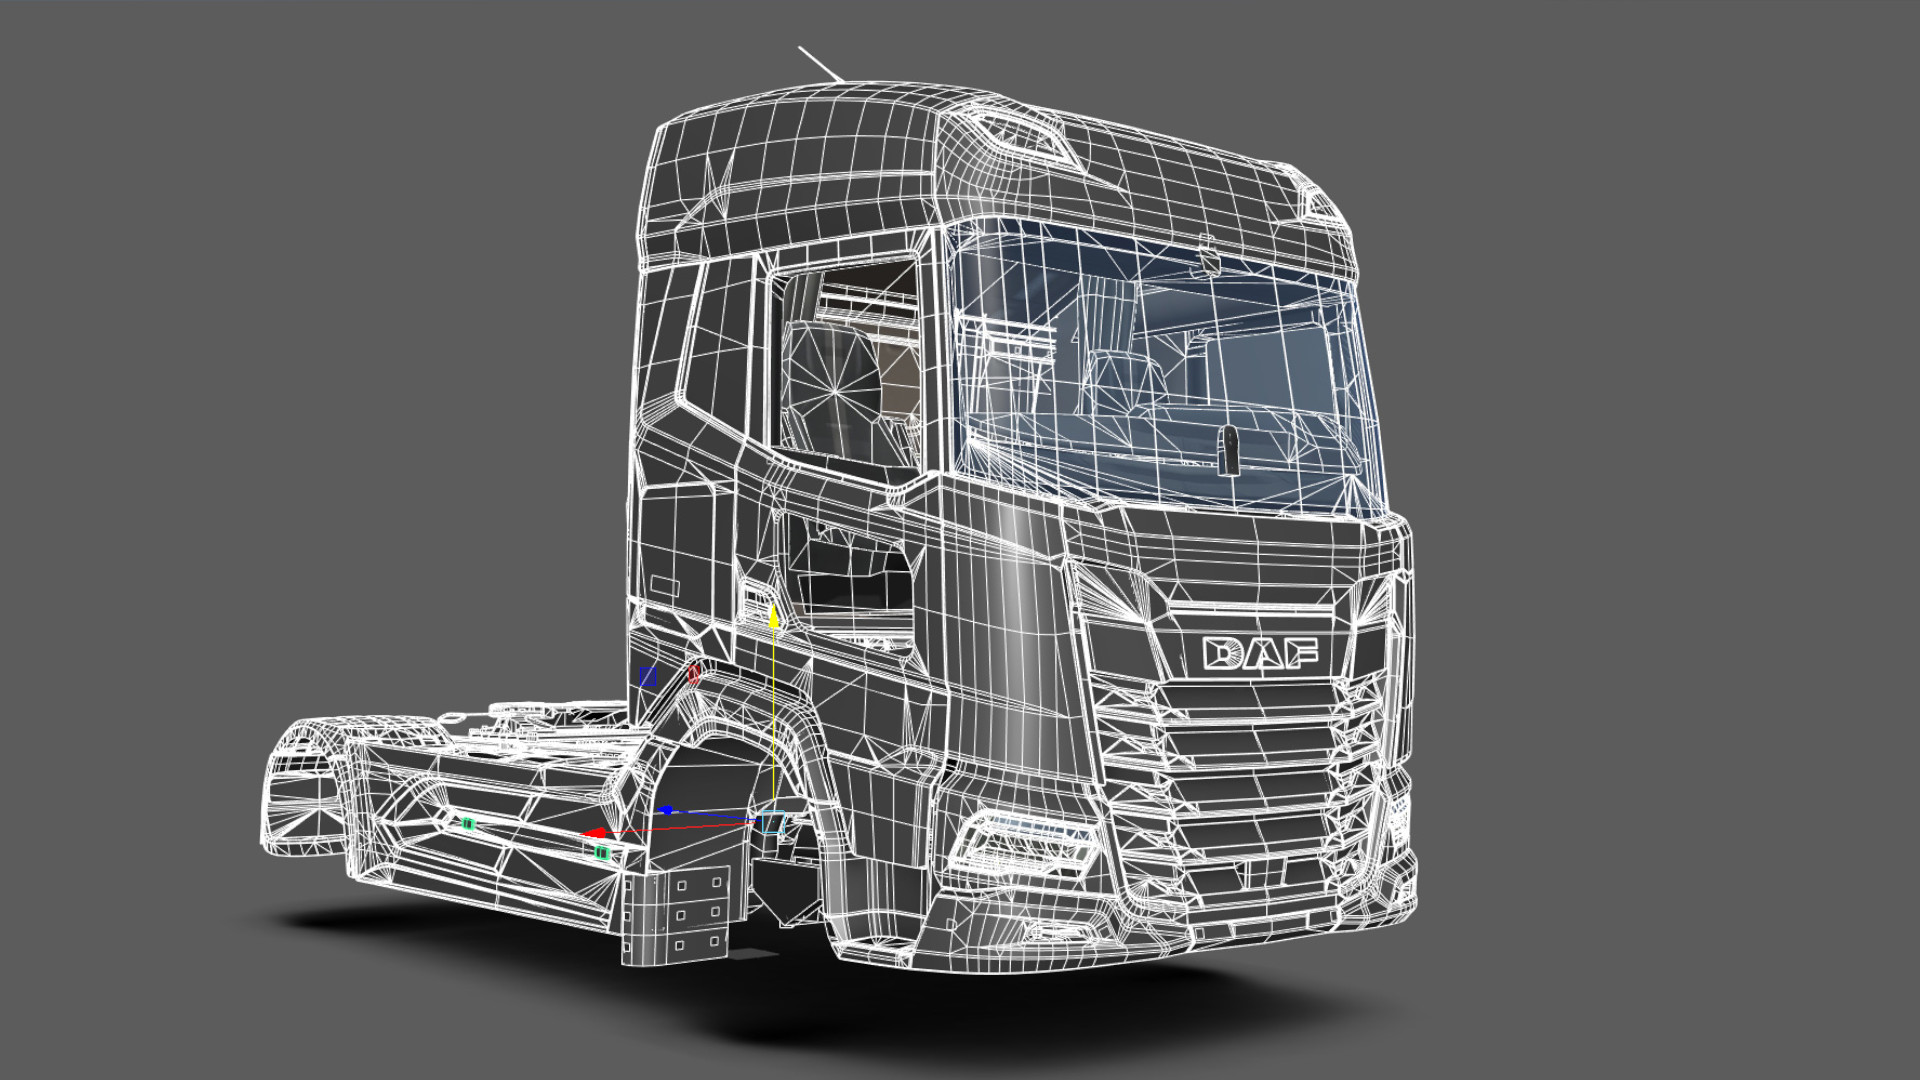 Euro Truck Simulator 2 devs provide an update on the delayed DAF XF